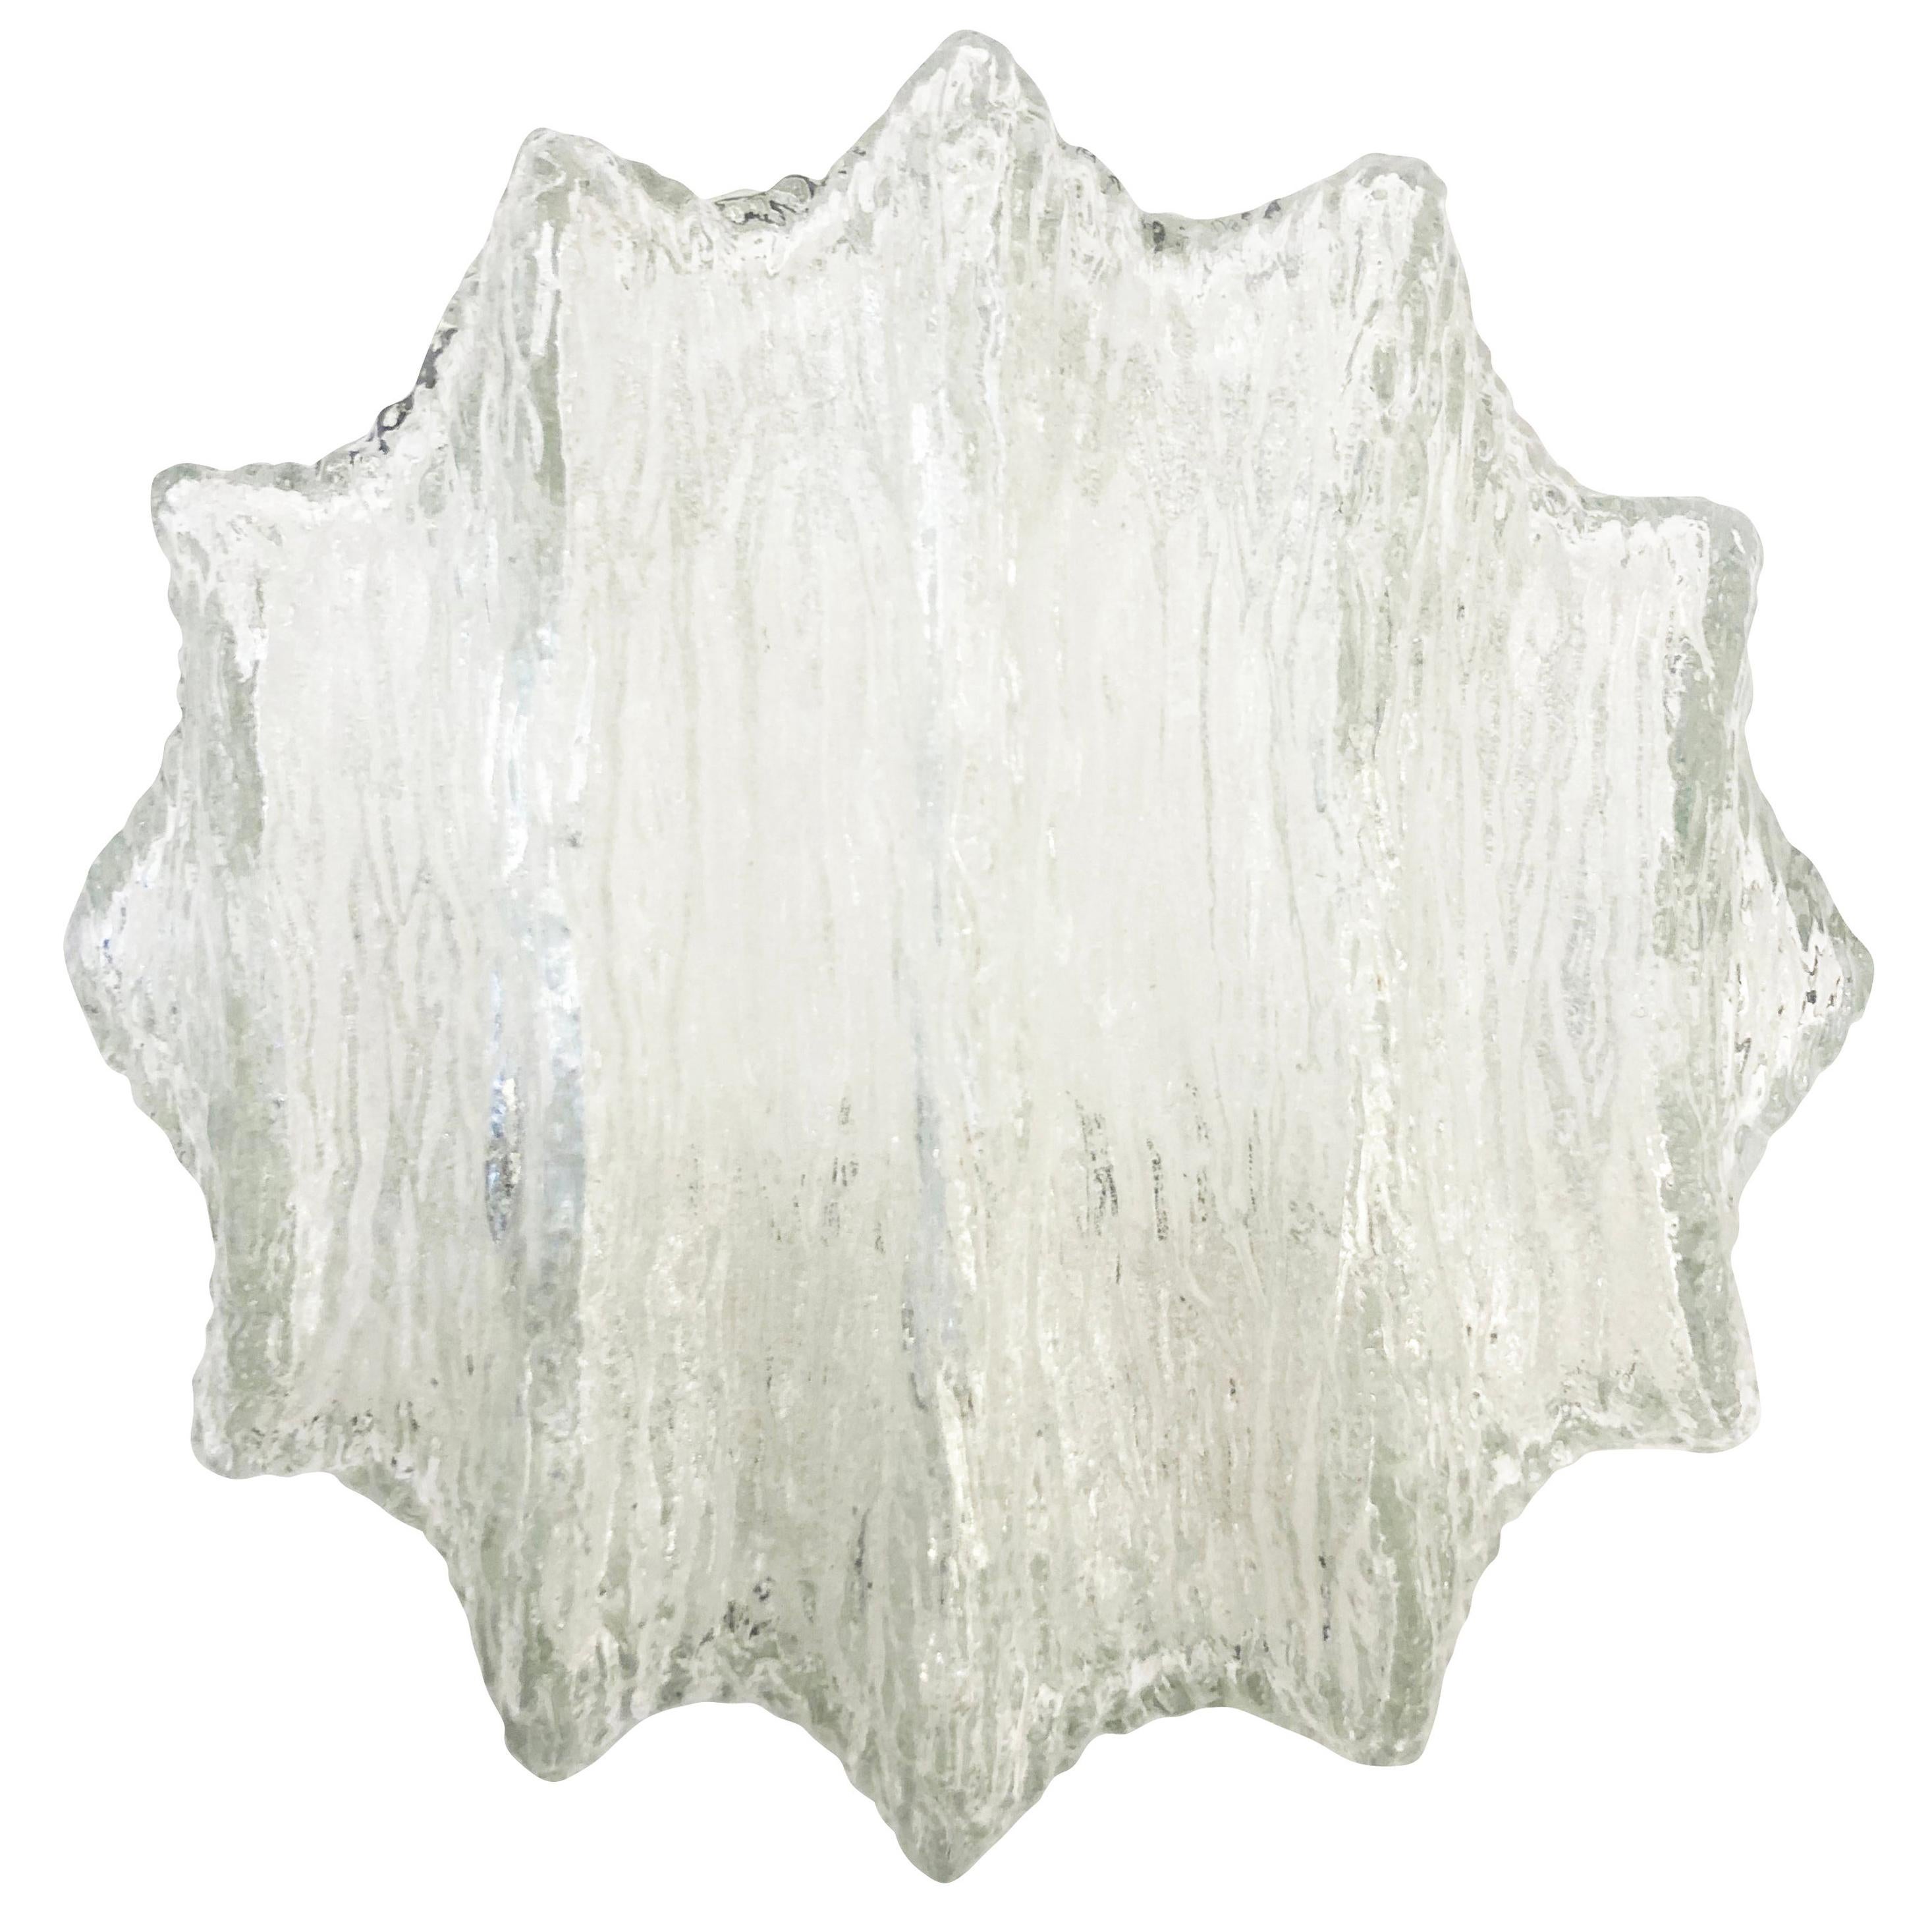 Star Shaped Murano Glass Flushmounts or Sconces